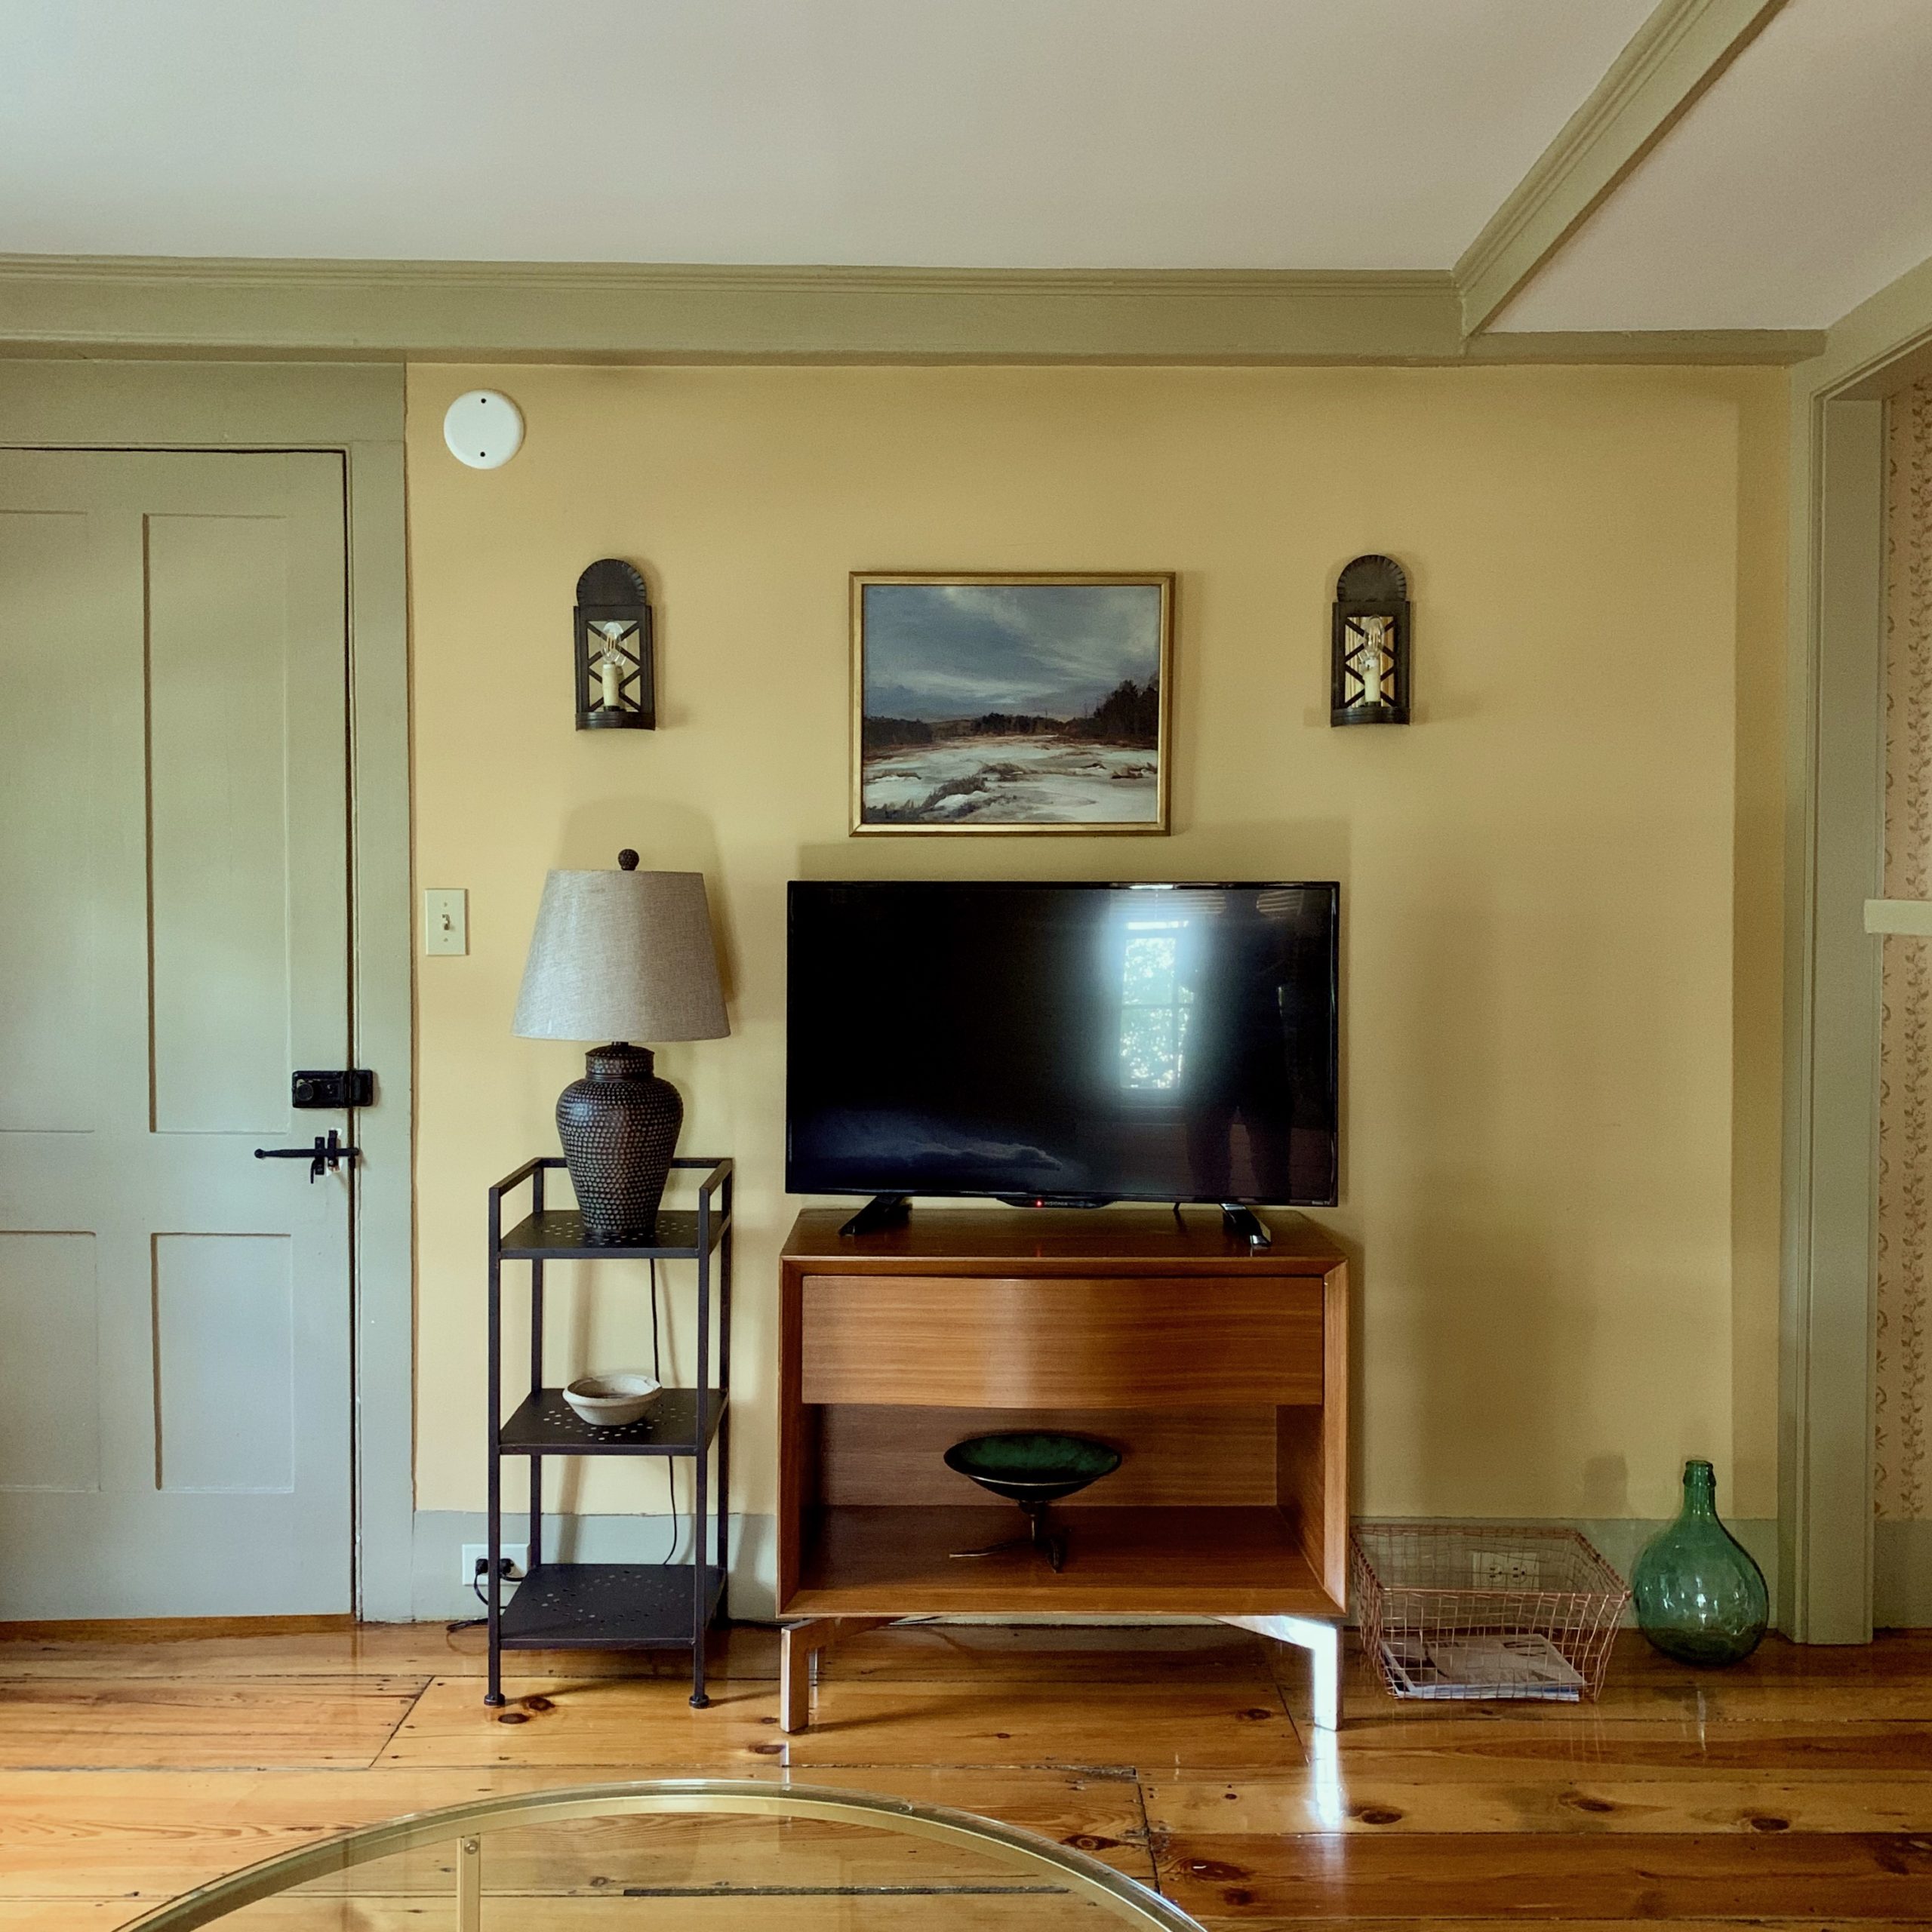 18th century mouldings and doors - 153 Elm St airbnb - TV wall